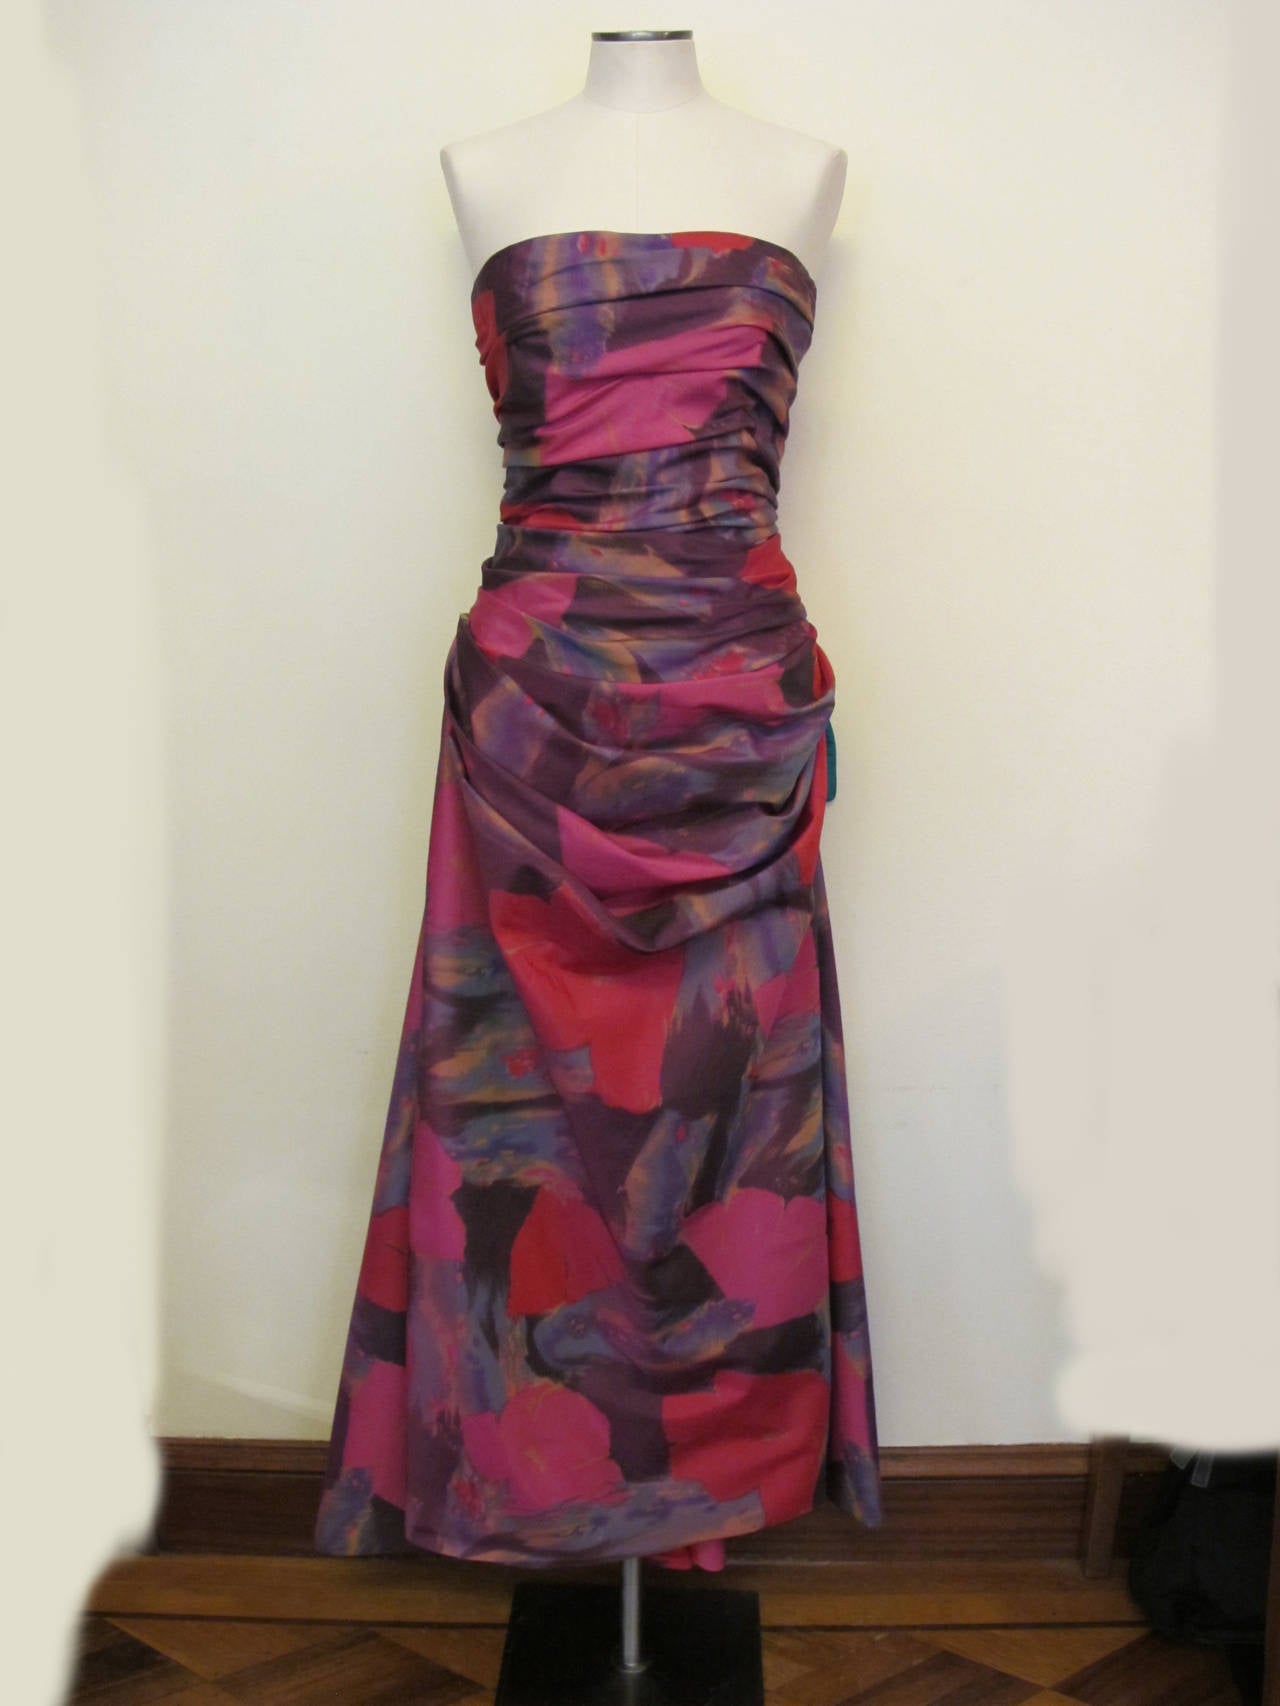 The amazing scope of Bob Mackie fashion is captured in this silk taffeta floral evening gown. Each layer is gathered in the front and forms a lush draping effect.. The colors of the flowers are fuchsia, royal purple, crimson red with small touches